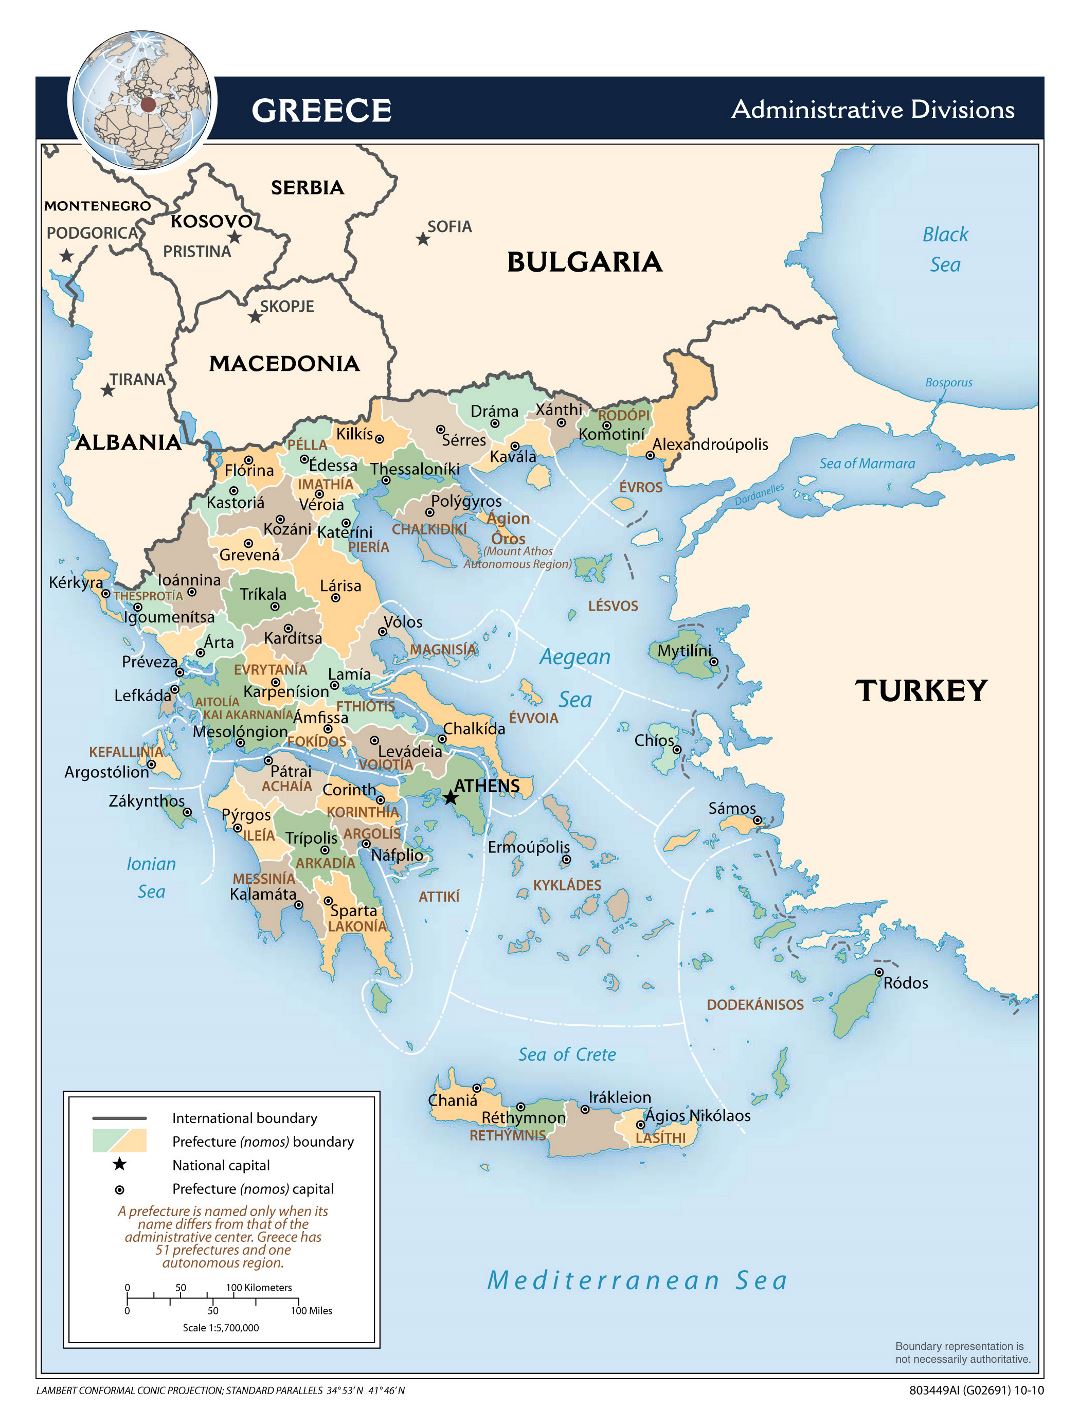 Large scale administrative divisions map of Greece - 2010